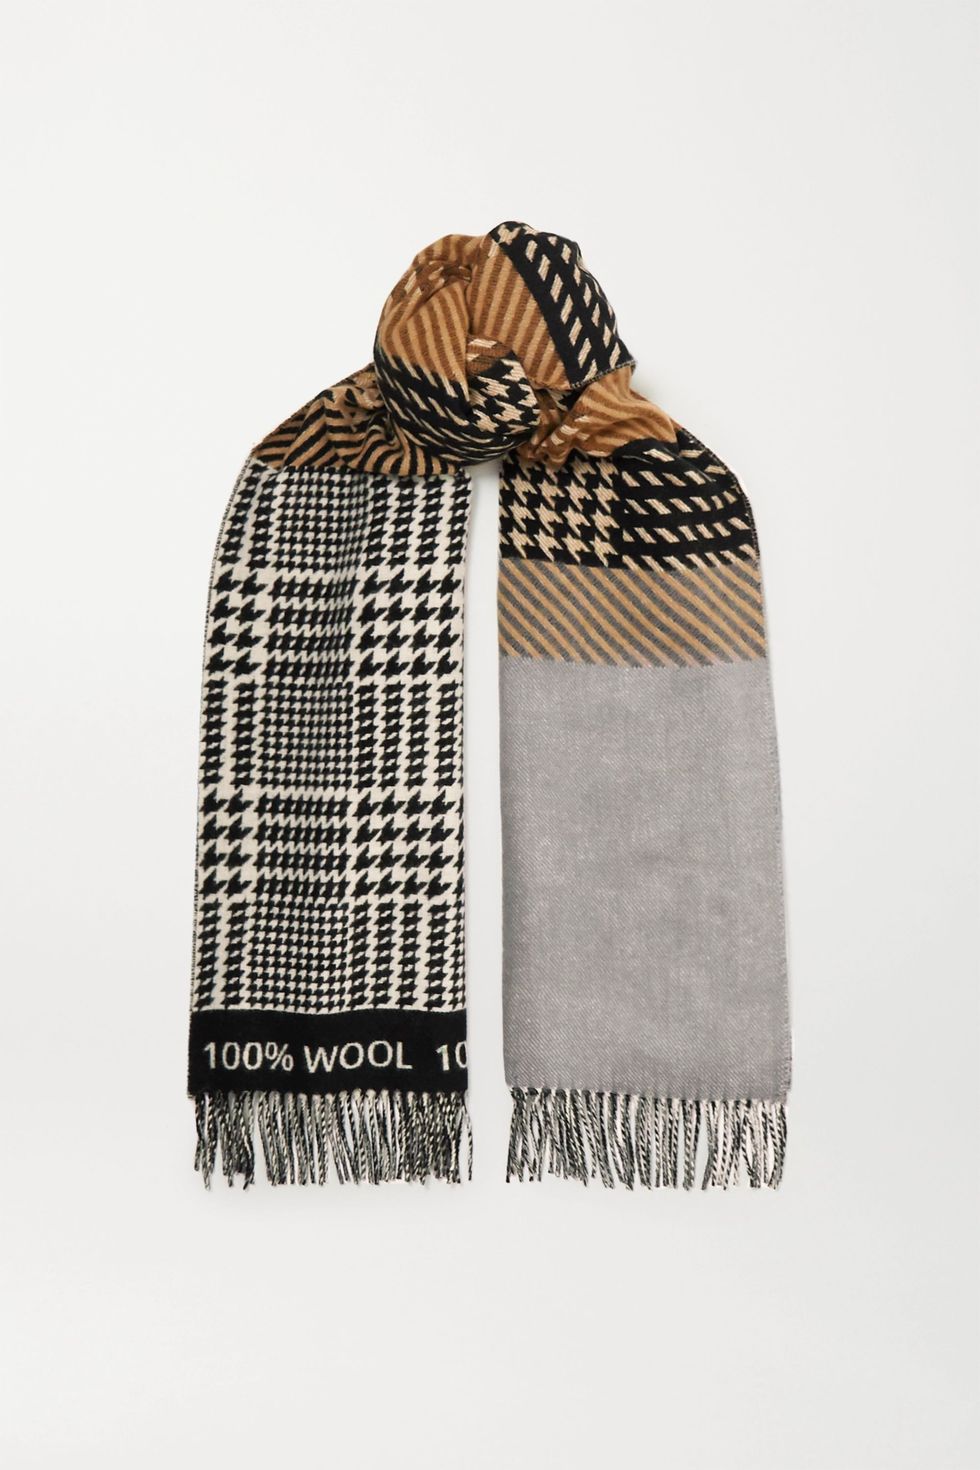 Prince Charles Launches a Limited Edition Luxury Wool Scarf